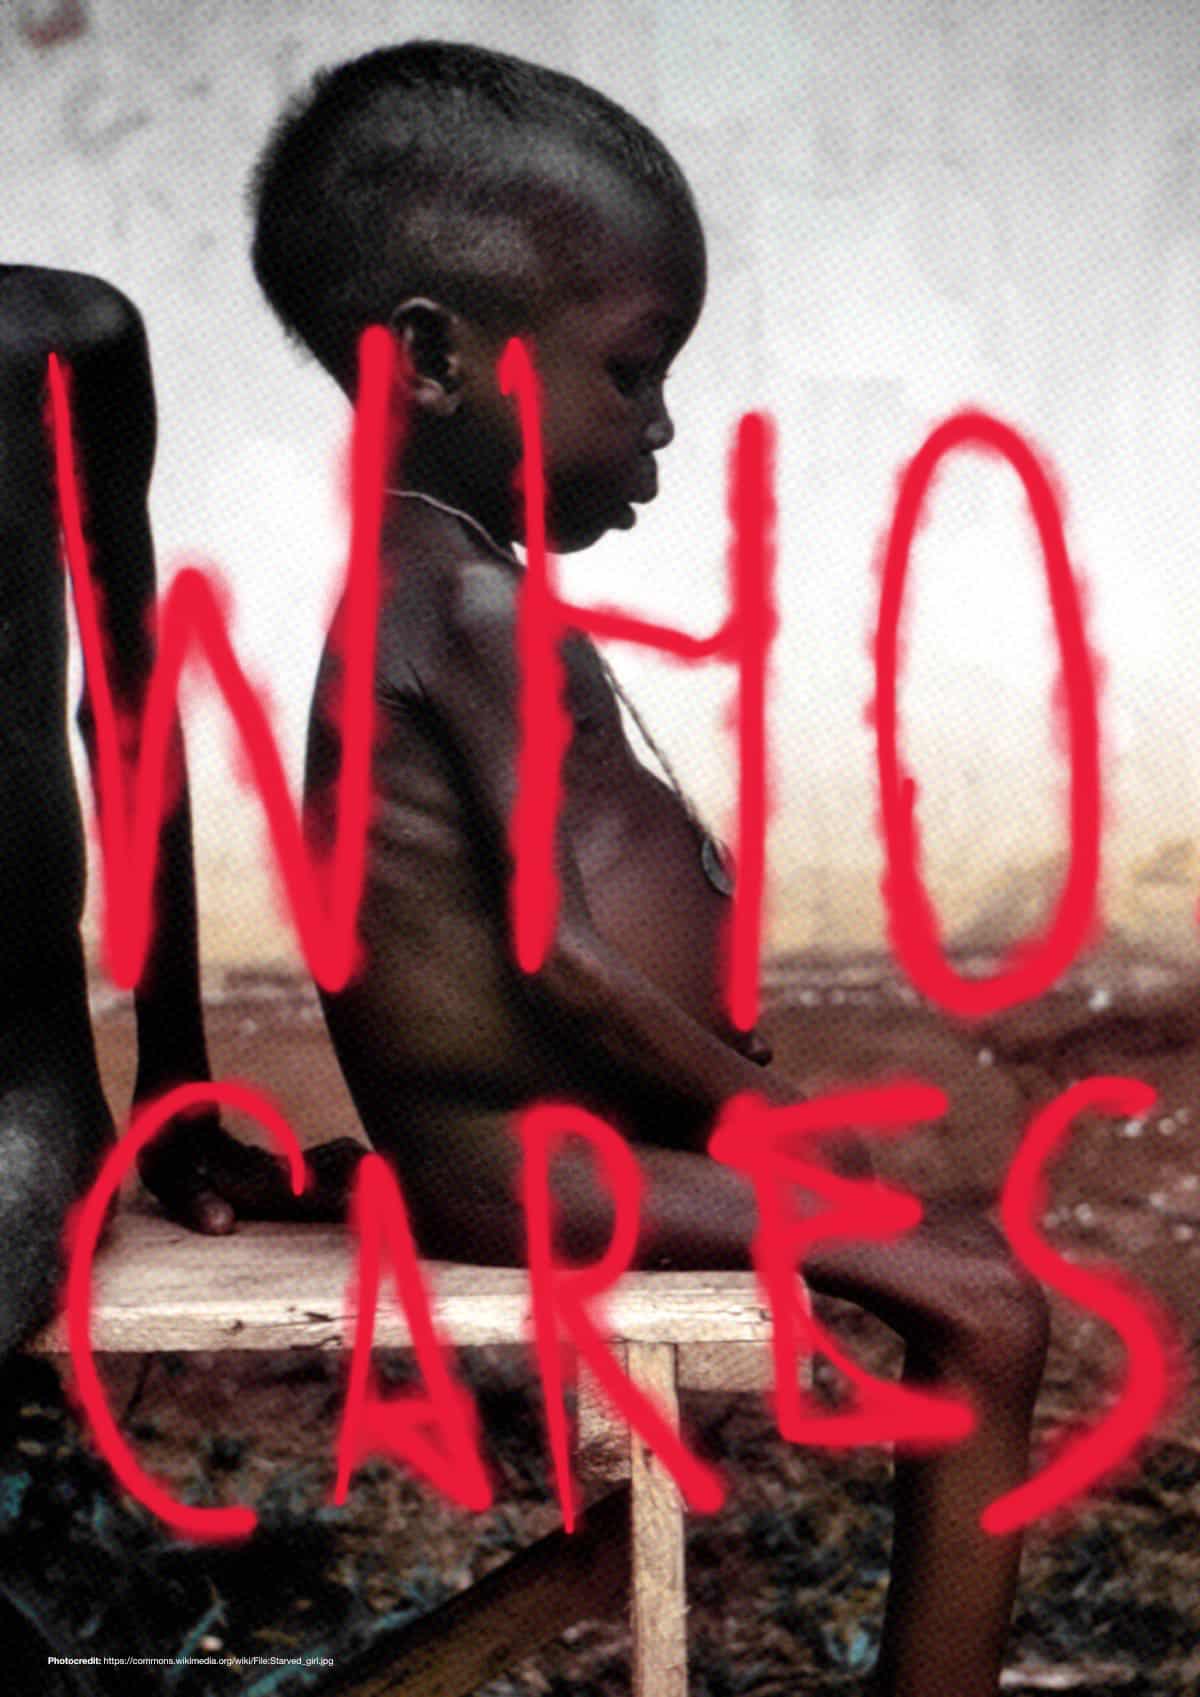 Who cares? Poster Michael Leonhartsberger